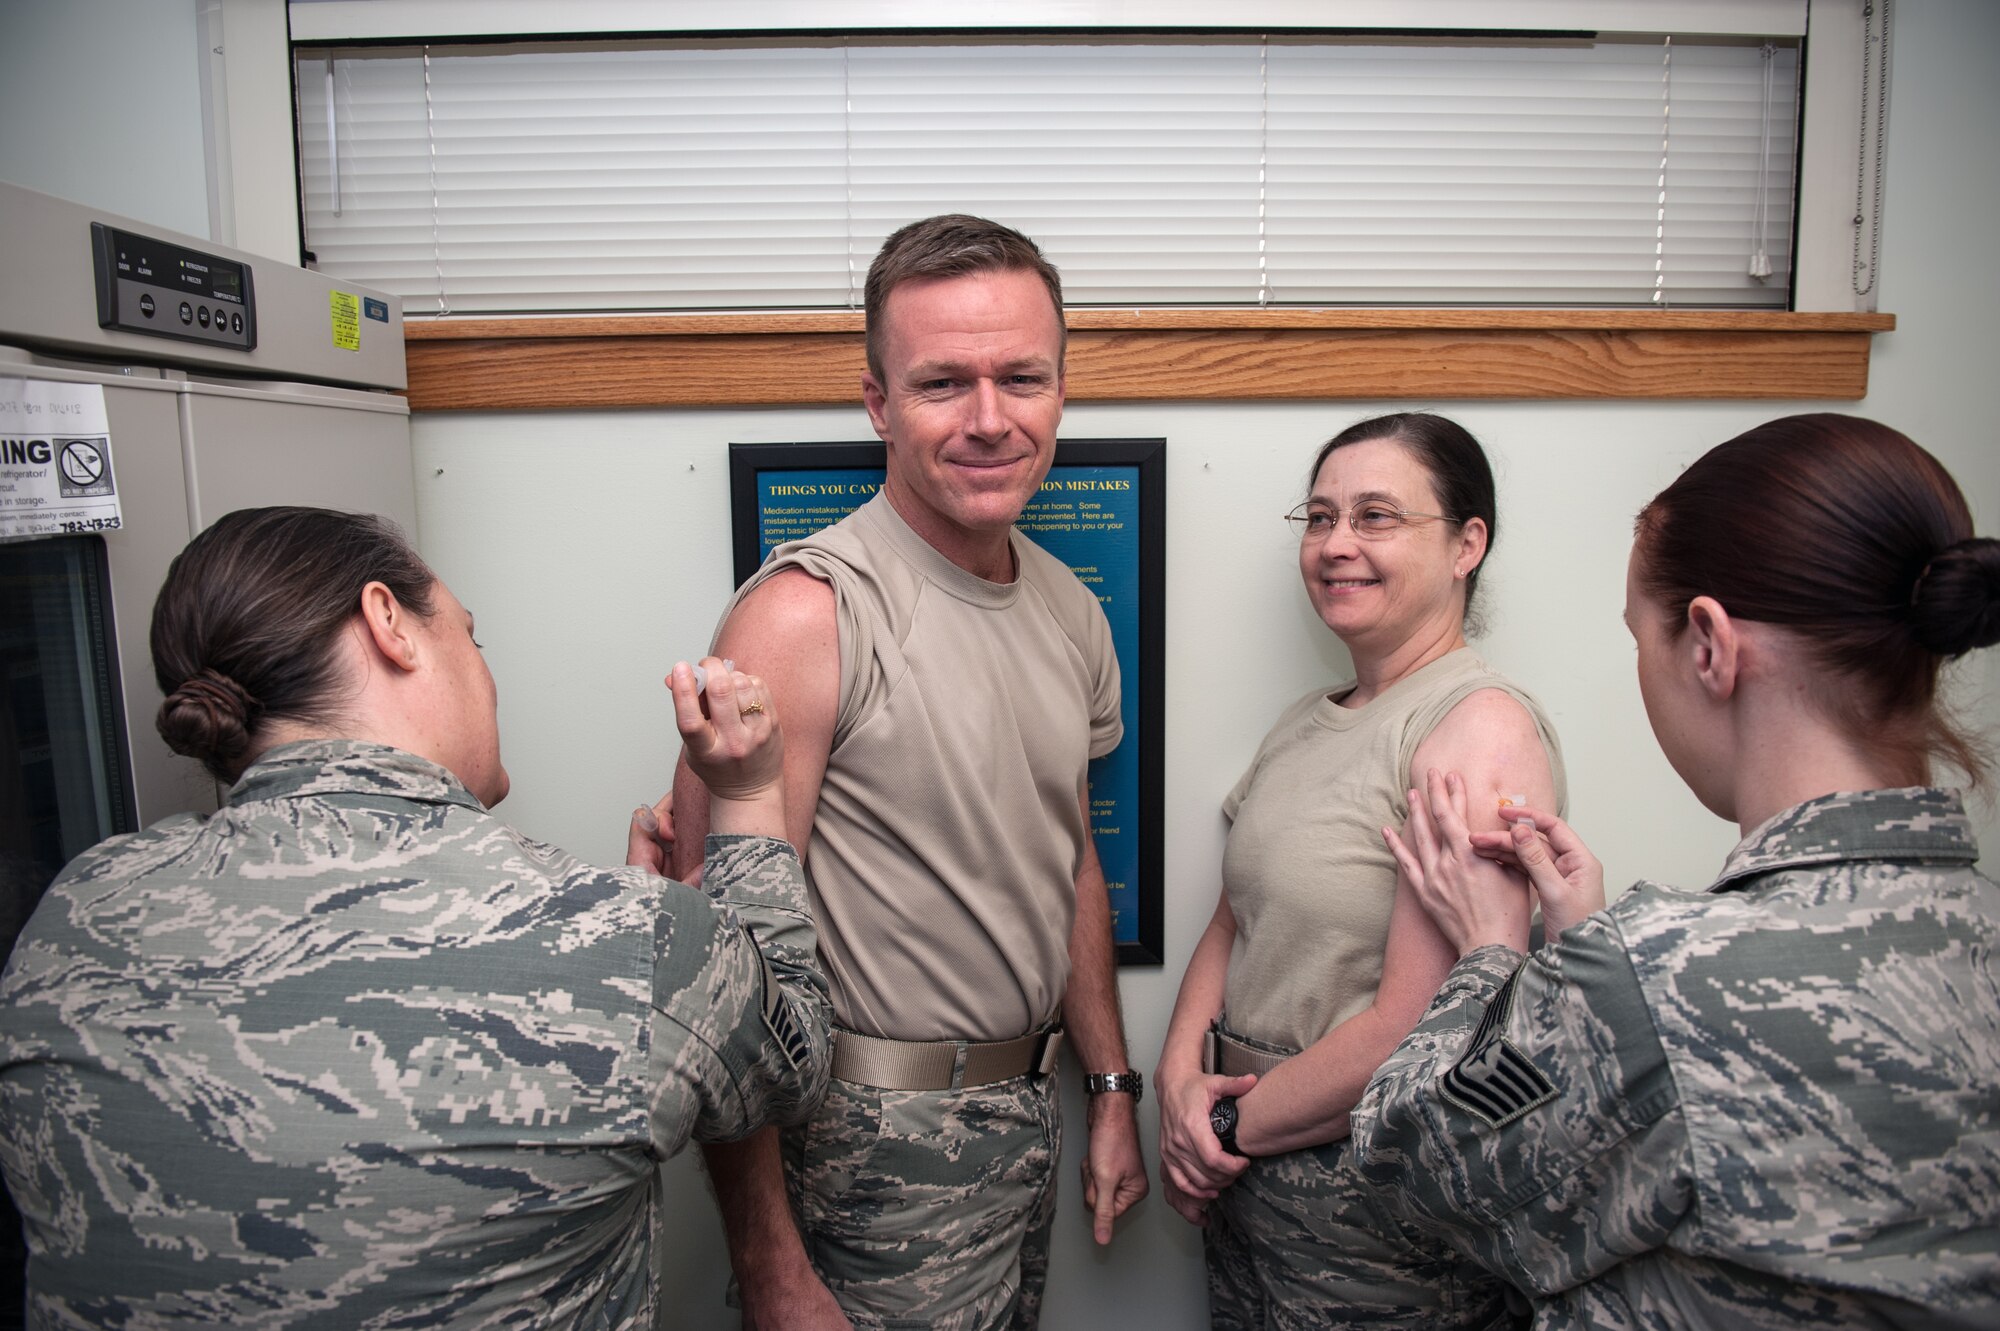 Airmen assigned to Kunsan Air Base, Republic of Korea, receive their Japanese encephalitis vaccine in 2015. Diseases like Japanese encephalitis are rare in the U.S., but common some places overseas. Vaccines are a vital part of individual medical readiness. (U.S. Air Force photo by Senior Airman Taylor Curry)